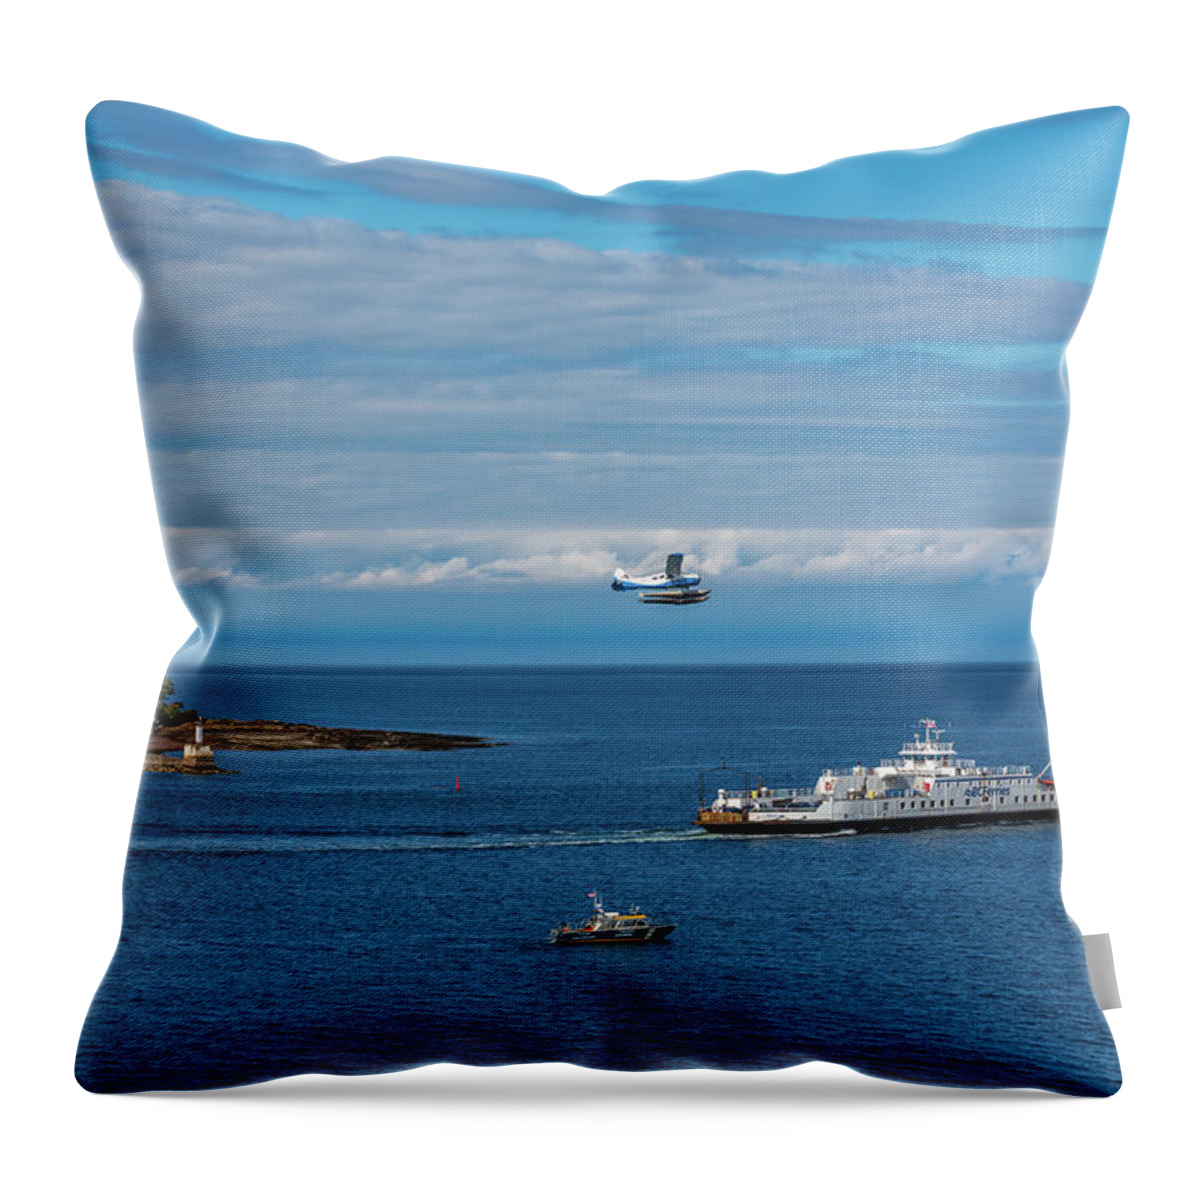 Bc Ferries Throw Pillow featuring the photograph Harbor Patrol Sea Plane and Ferry by Darryl Brooks